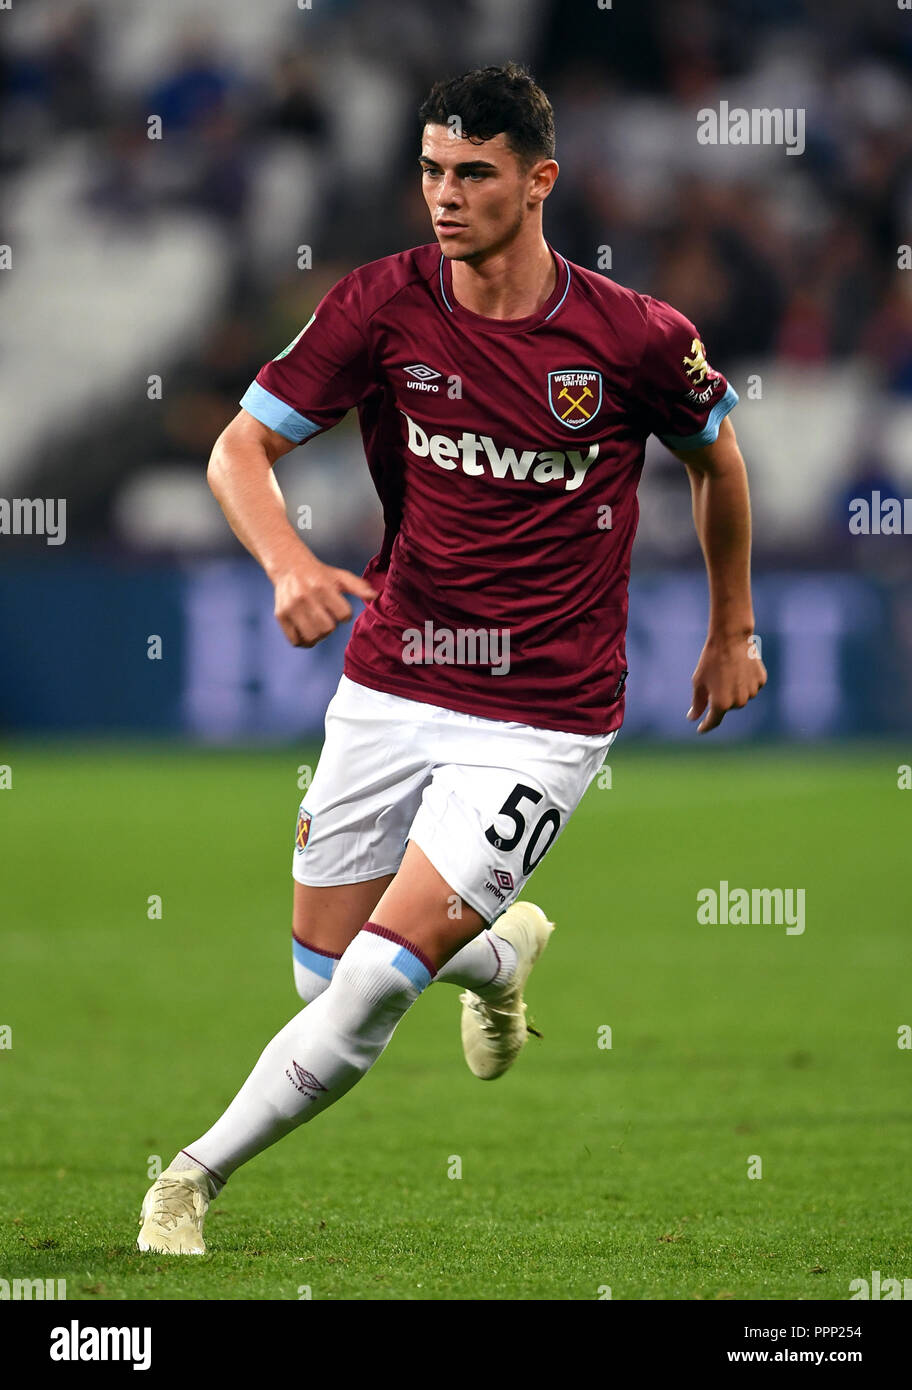 West Ham United's Joe Powell during the Carabao Cup, Third Round match at London Stadium. PRESS ASSOCIATION Photo. Picture date: Wednesday September 26, 2018. See PA story SOCCER West Ham. Photo credit should read: Joe Giddens/PA Wire. RESTRICTIONS: EDITORIAL USE ONLY No use with unauthorised audio, video, data, fixture lists, club/league logos or 'live' services. Online in-match use limited to 120 images, no video emulation. No use in betting, games or single club/league/player publications. Stock Photo